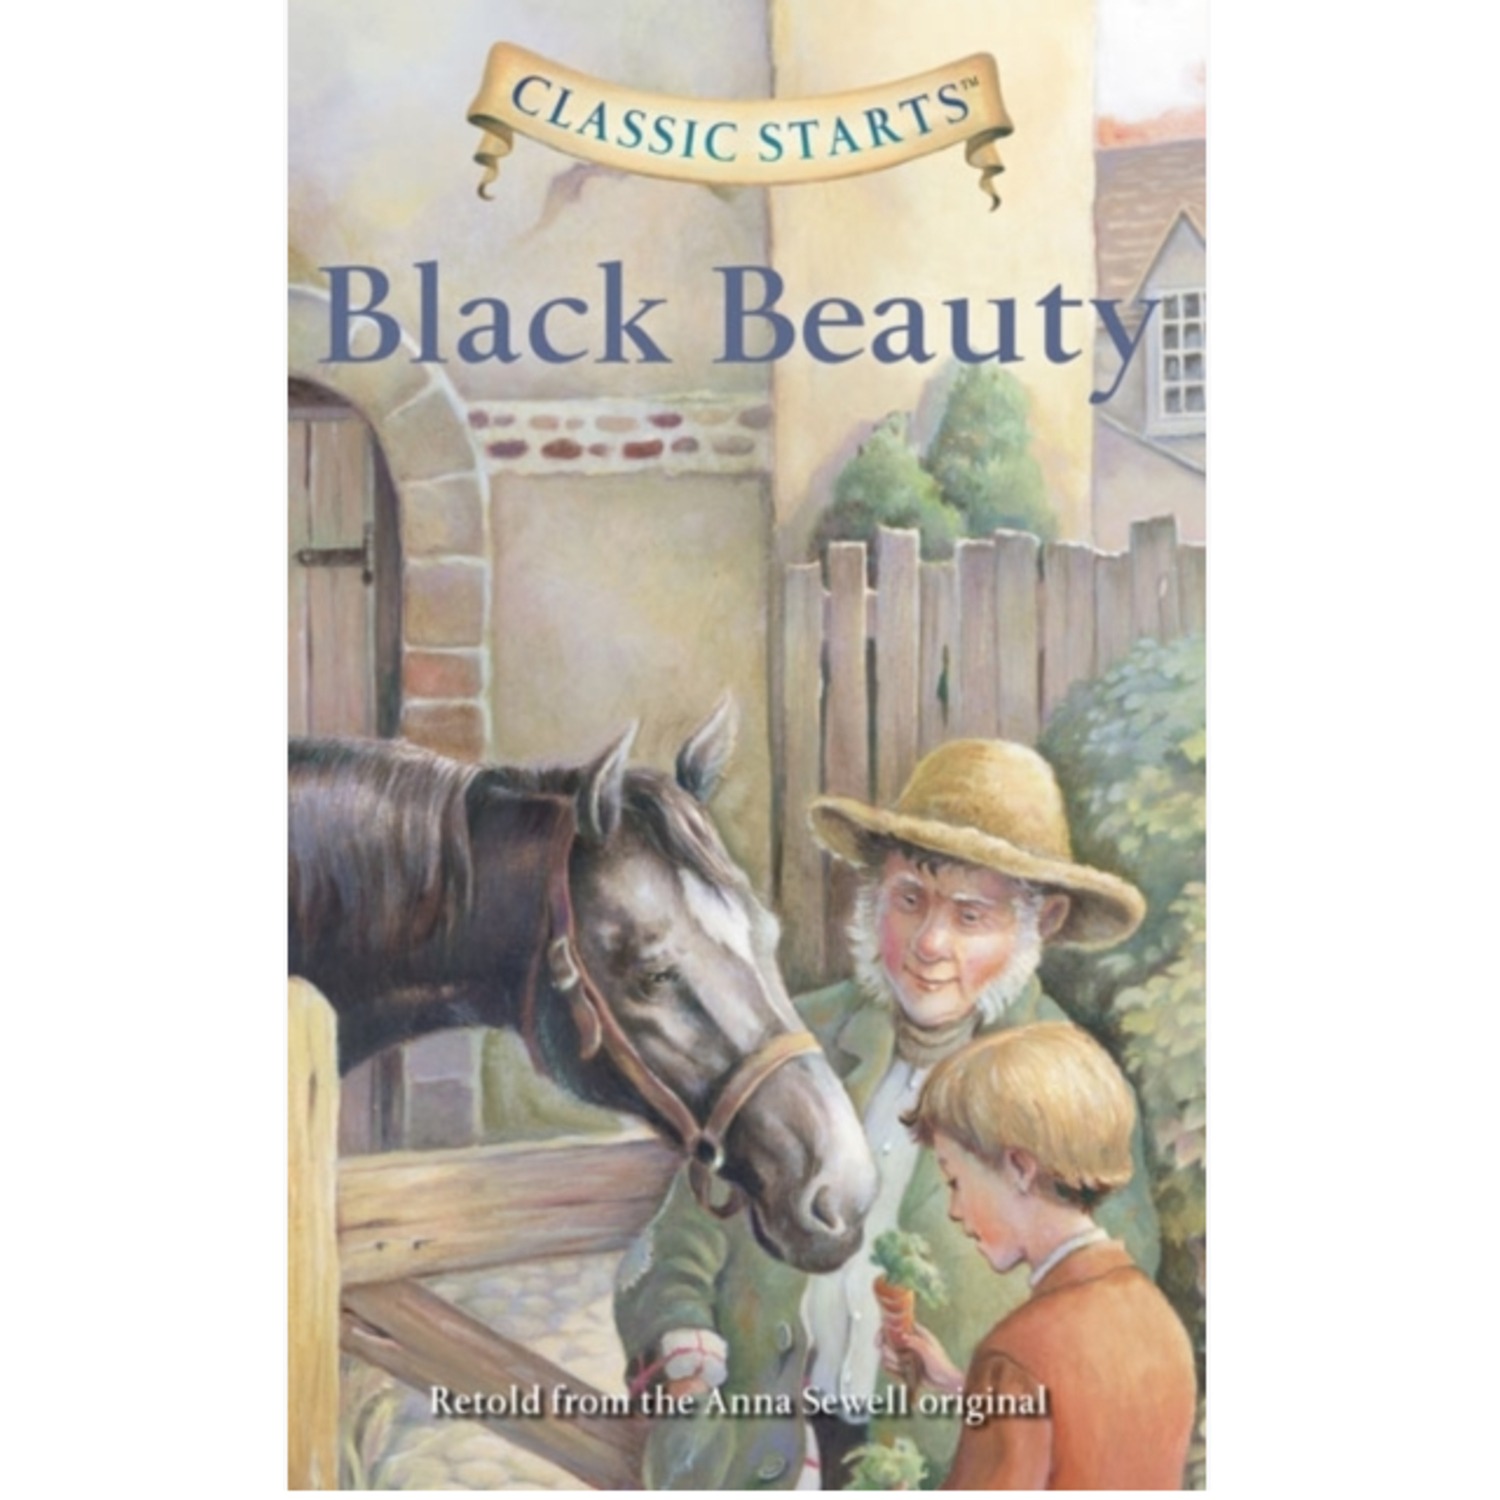 Black Beauty - Classic Starts, ideal for young readers